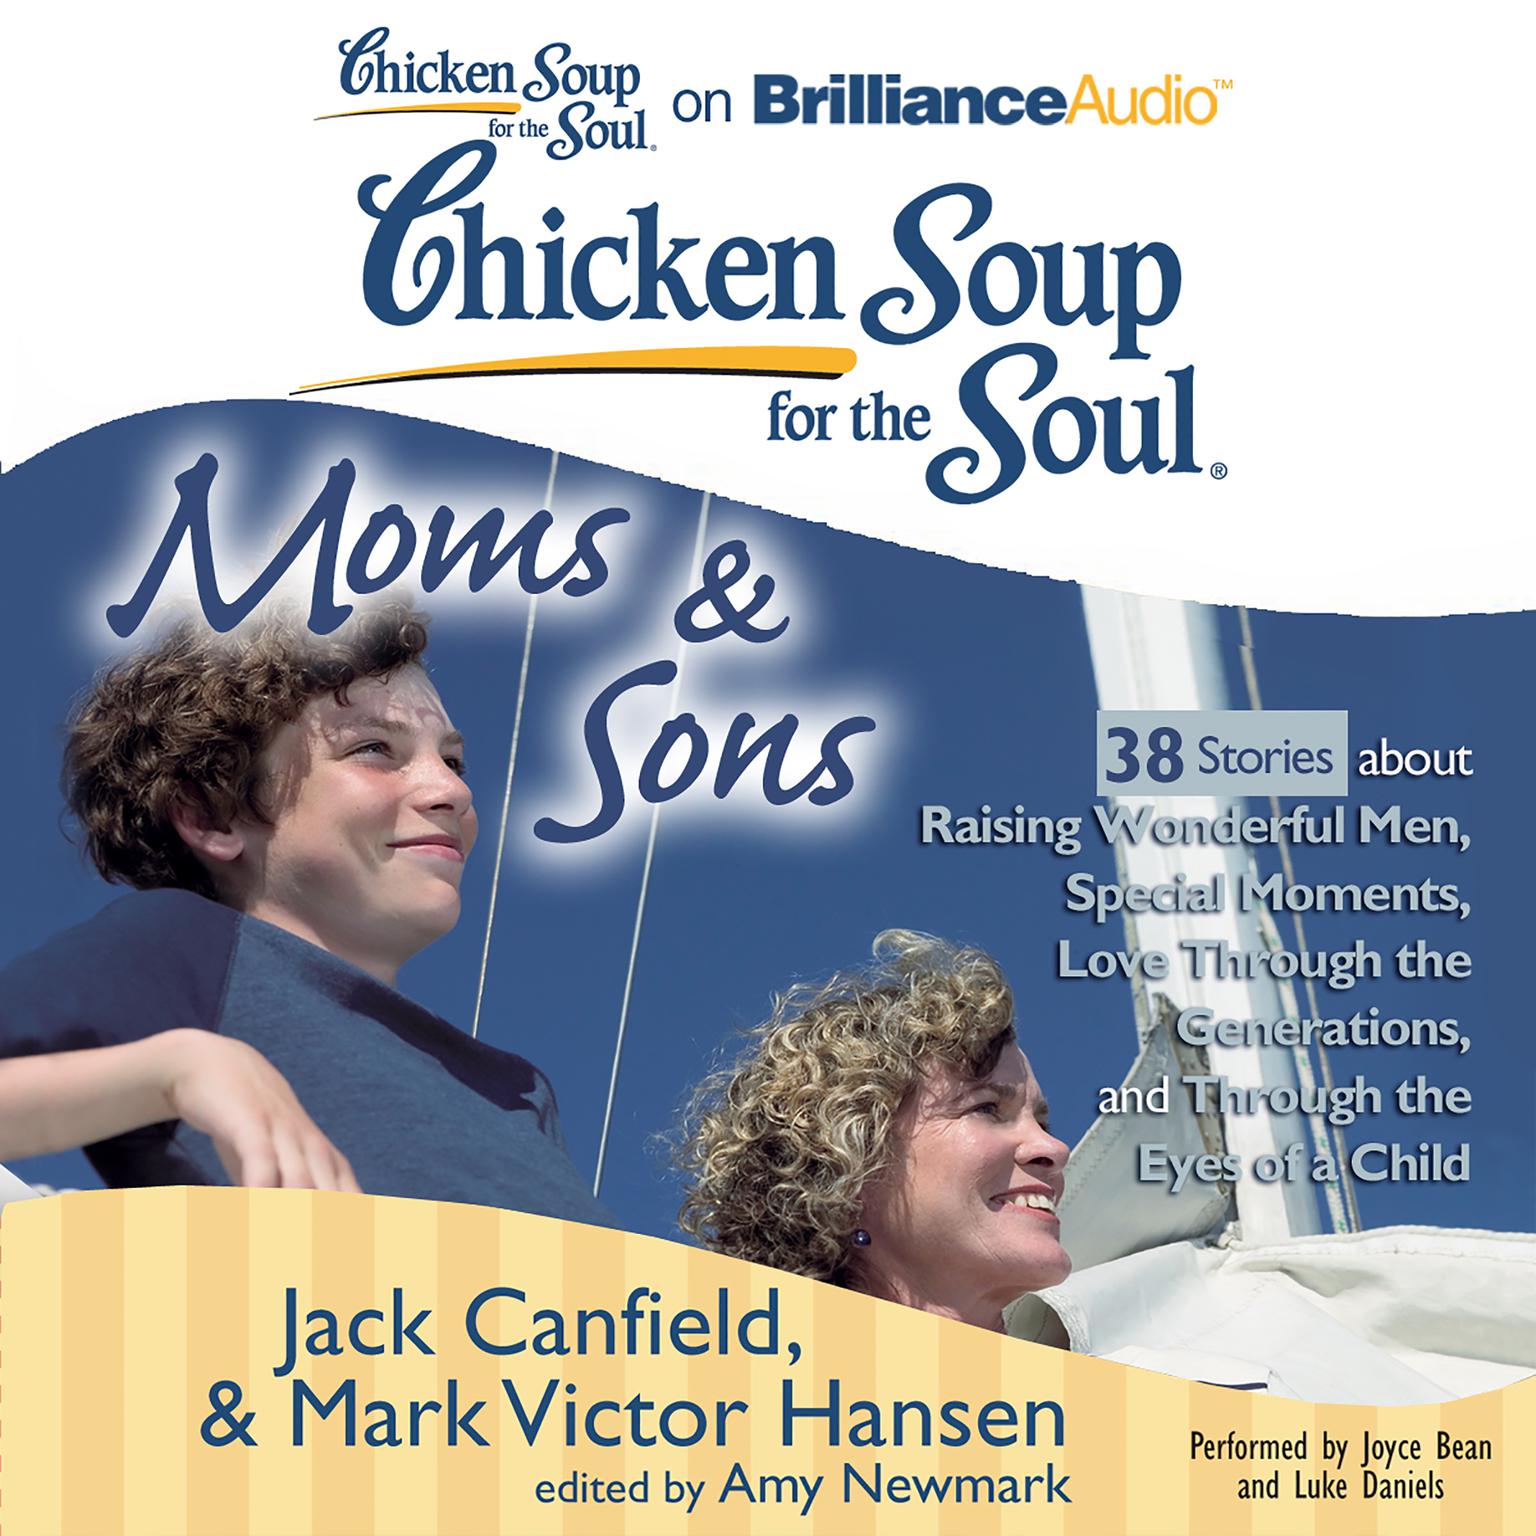 Chicken Soup for the Soul: Moms & Sons - 38 Stories about Raising Wonderful Men, Special Moments, Love Through the Generations, and Through the Eyes of a Child Audiobook, by Jack Canfield